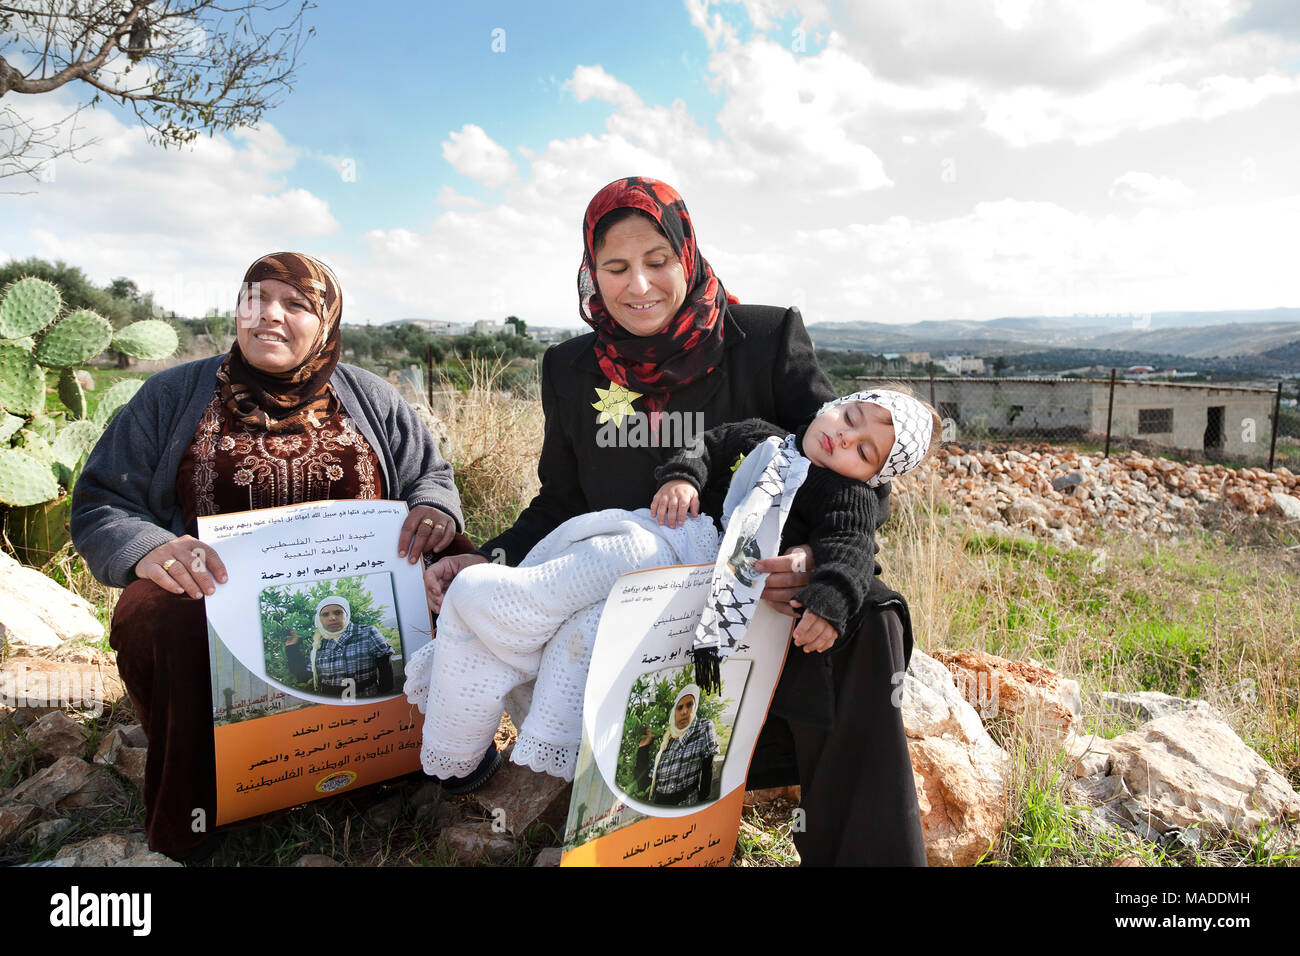 Bilin, Palestine, January 7 2011: Palestinian women and a toddler hold posters of Jawaher abu Rahma, who is thought to die in consequence of tear gas  Stock Photo